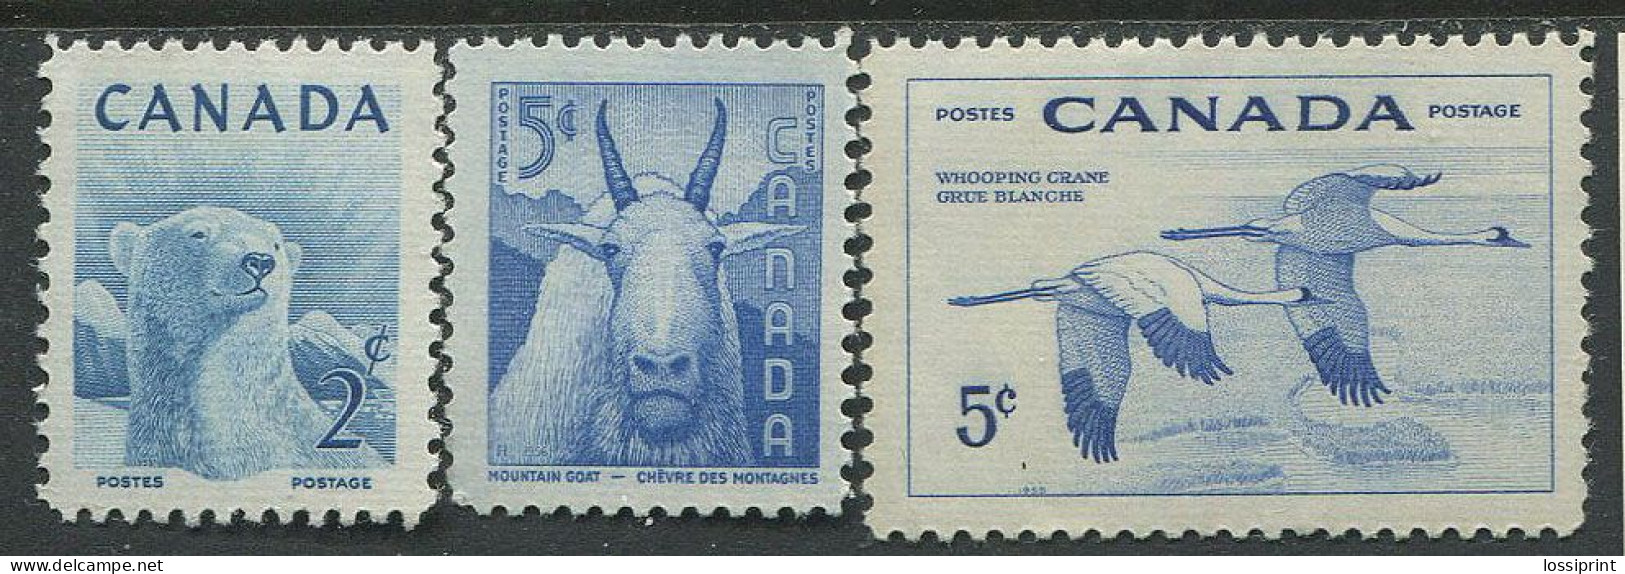 Canada:Unused Stamps Polar Bear, Goat, Storks, Birds, MNH - Rodents